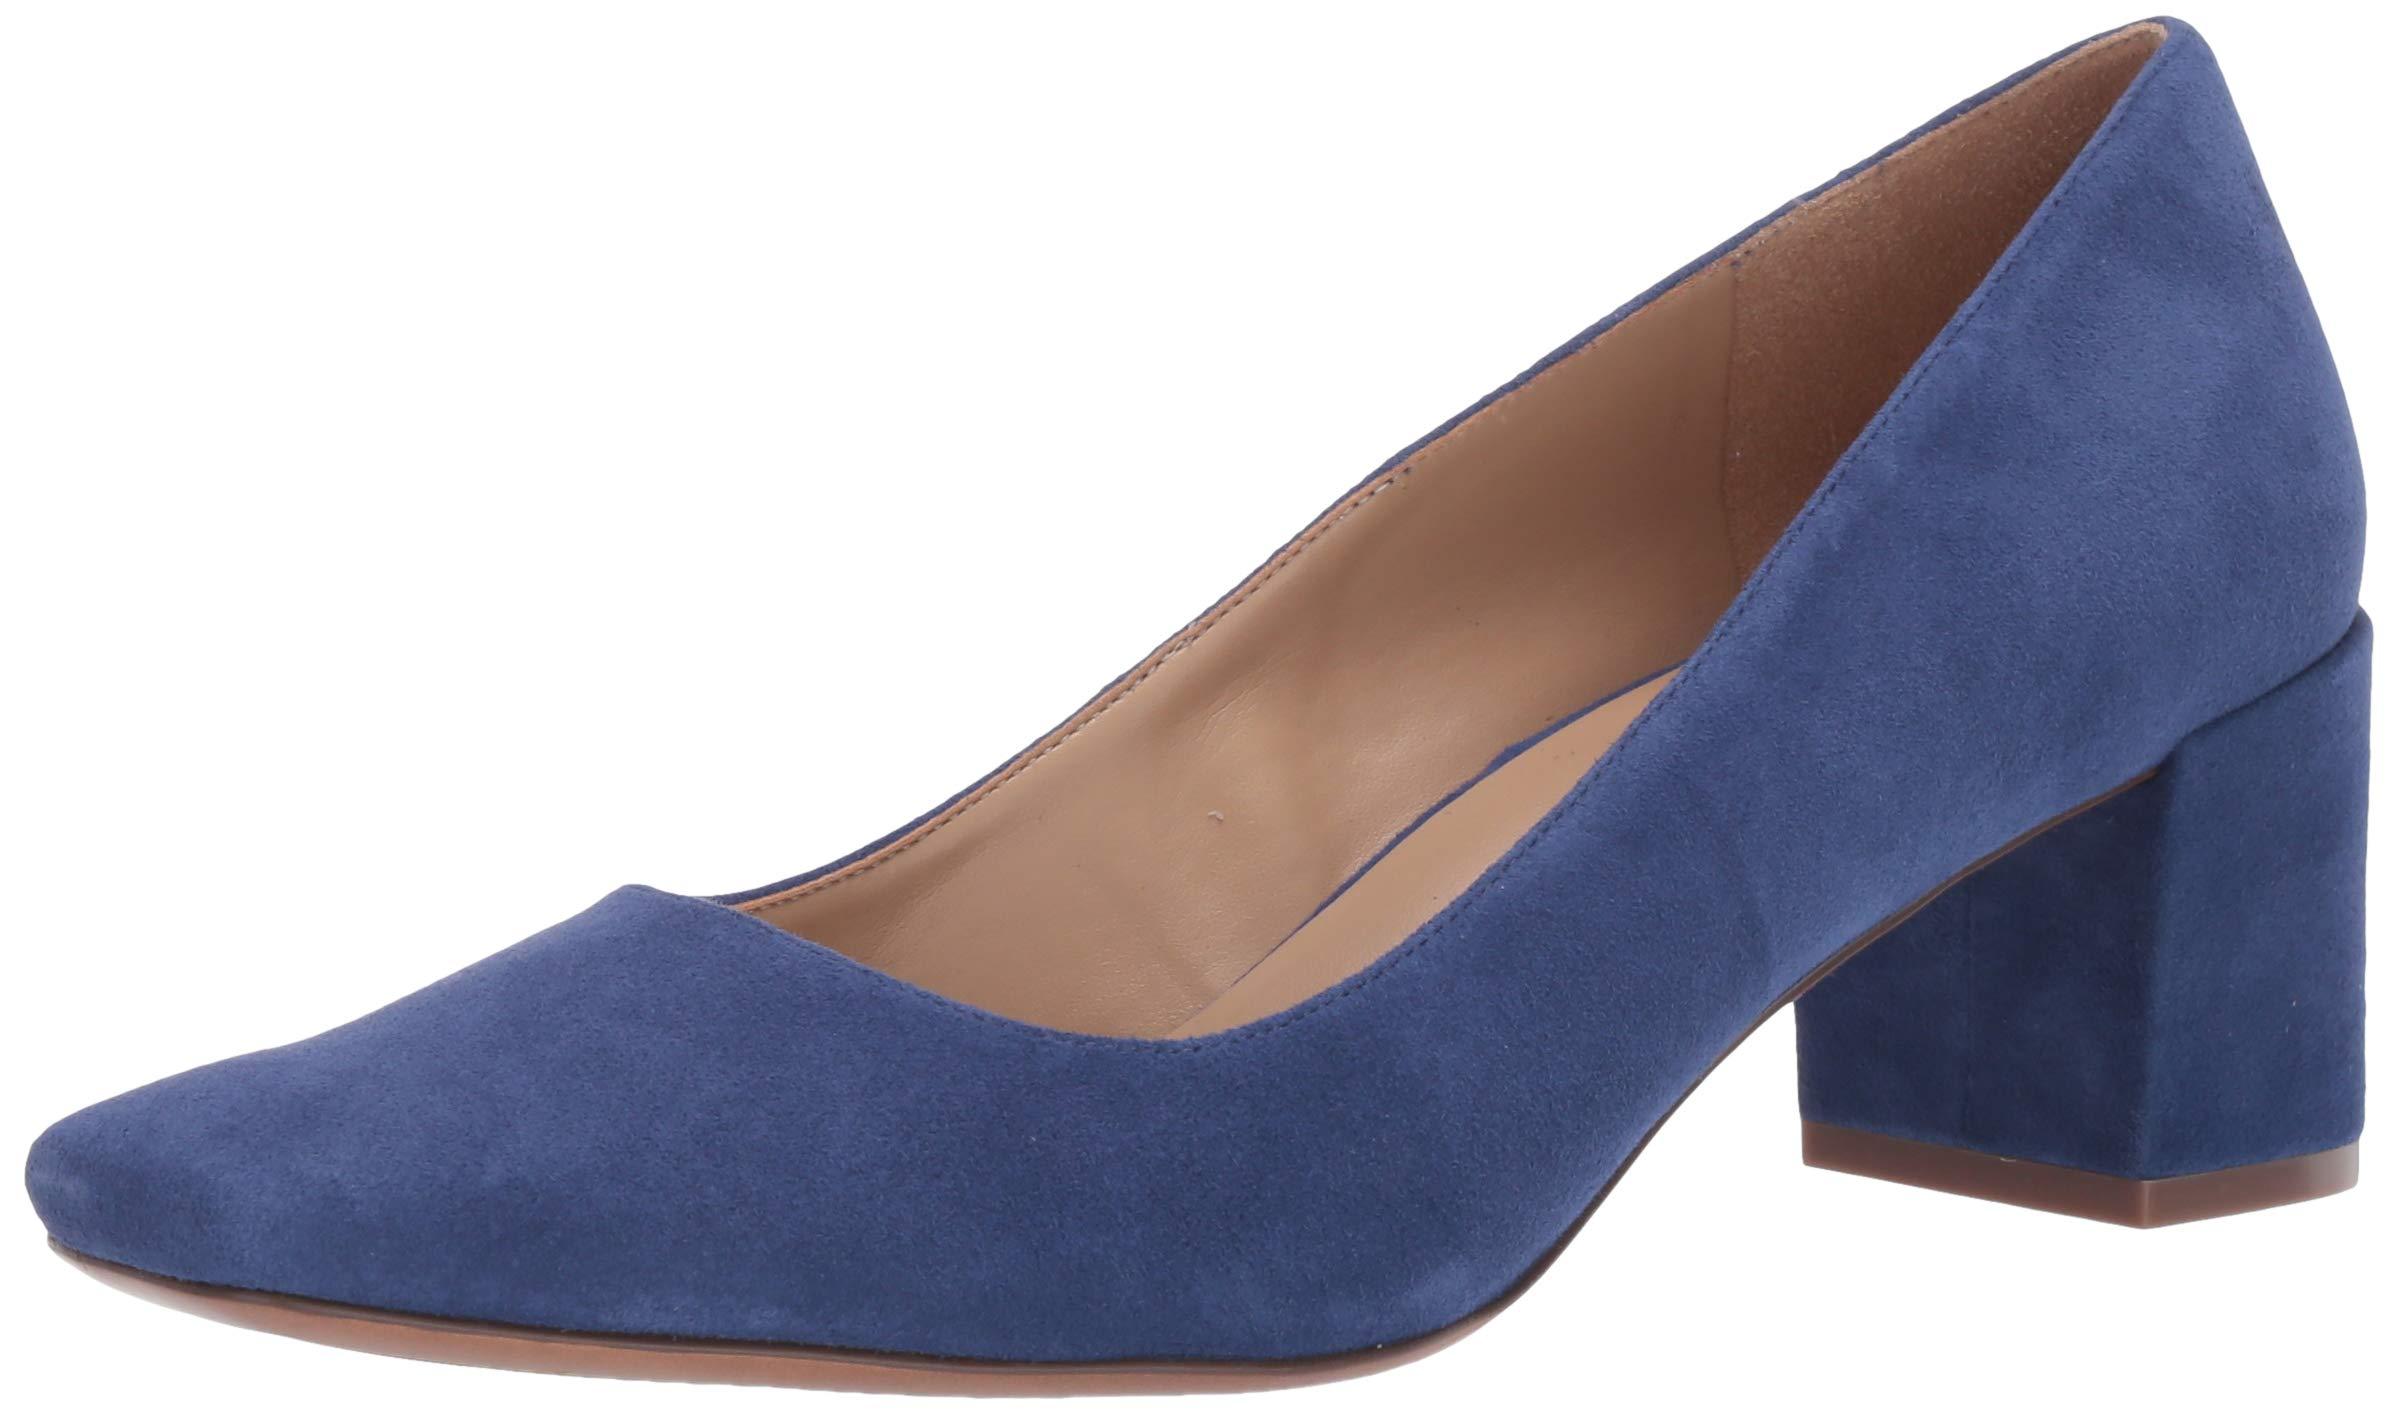 Naturalizer Leather Karina Pumps in Deep Sapphire (Blue) - Lyst